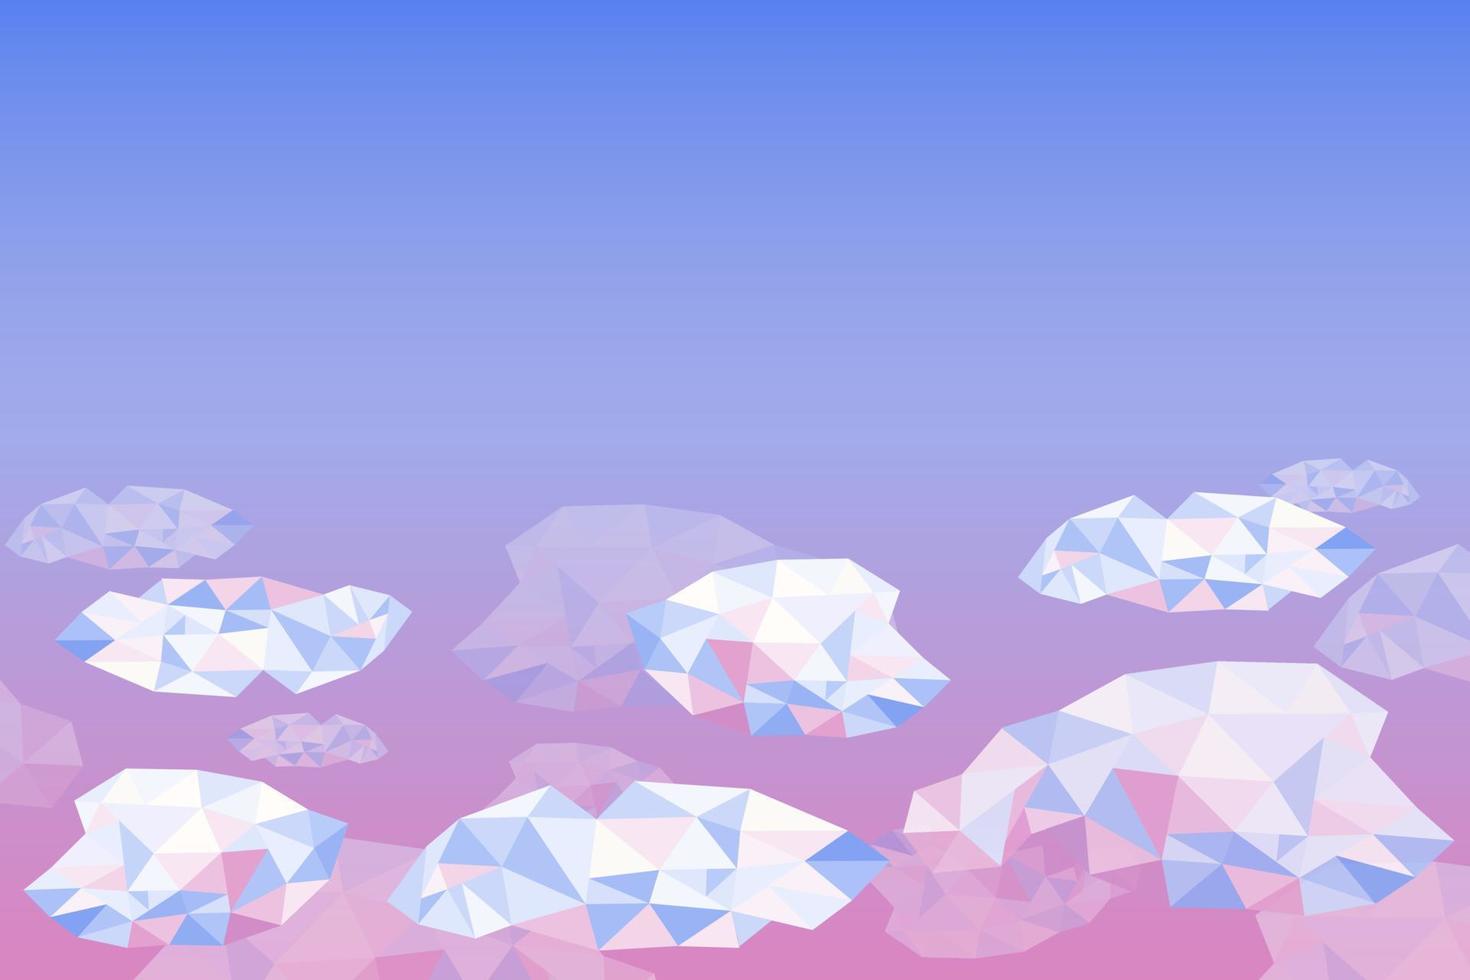 Low poly illustration of polar bears on the ice. vector - Low poly